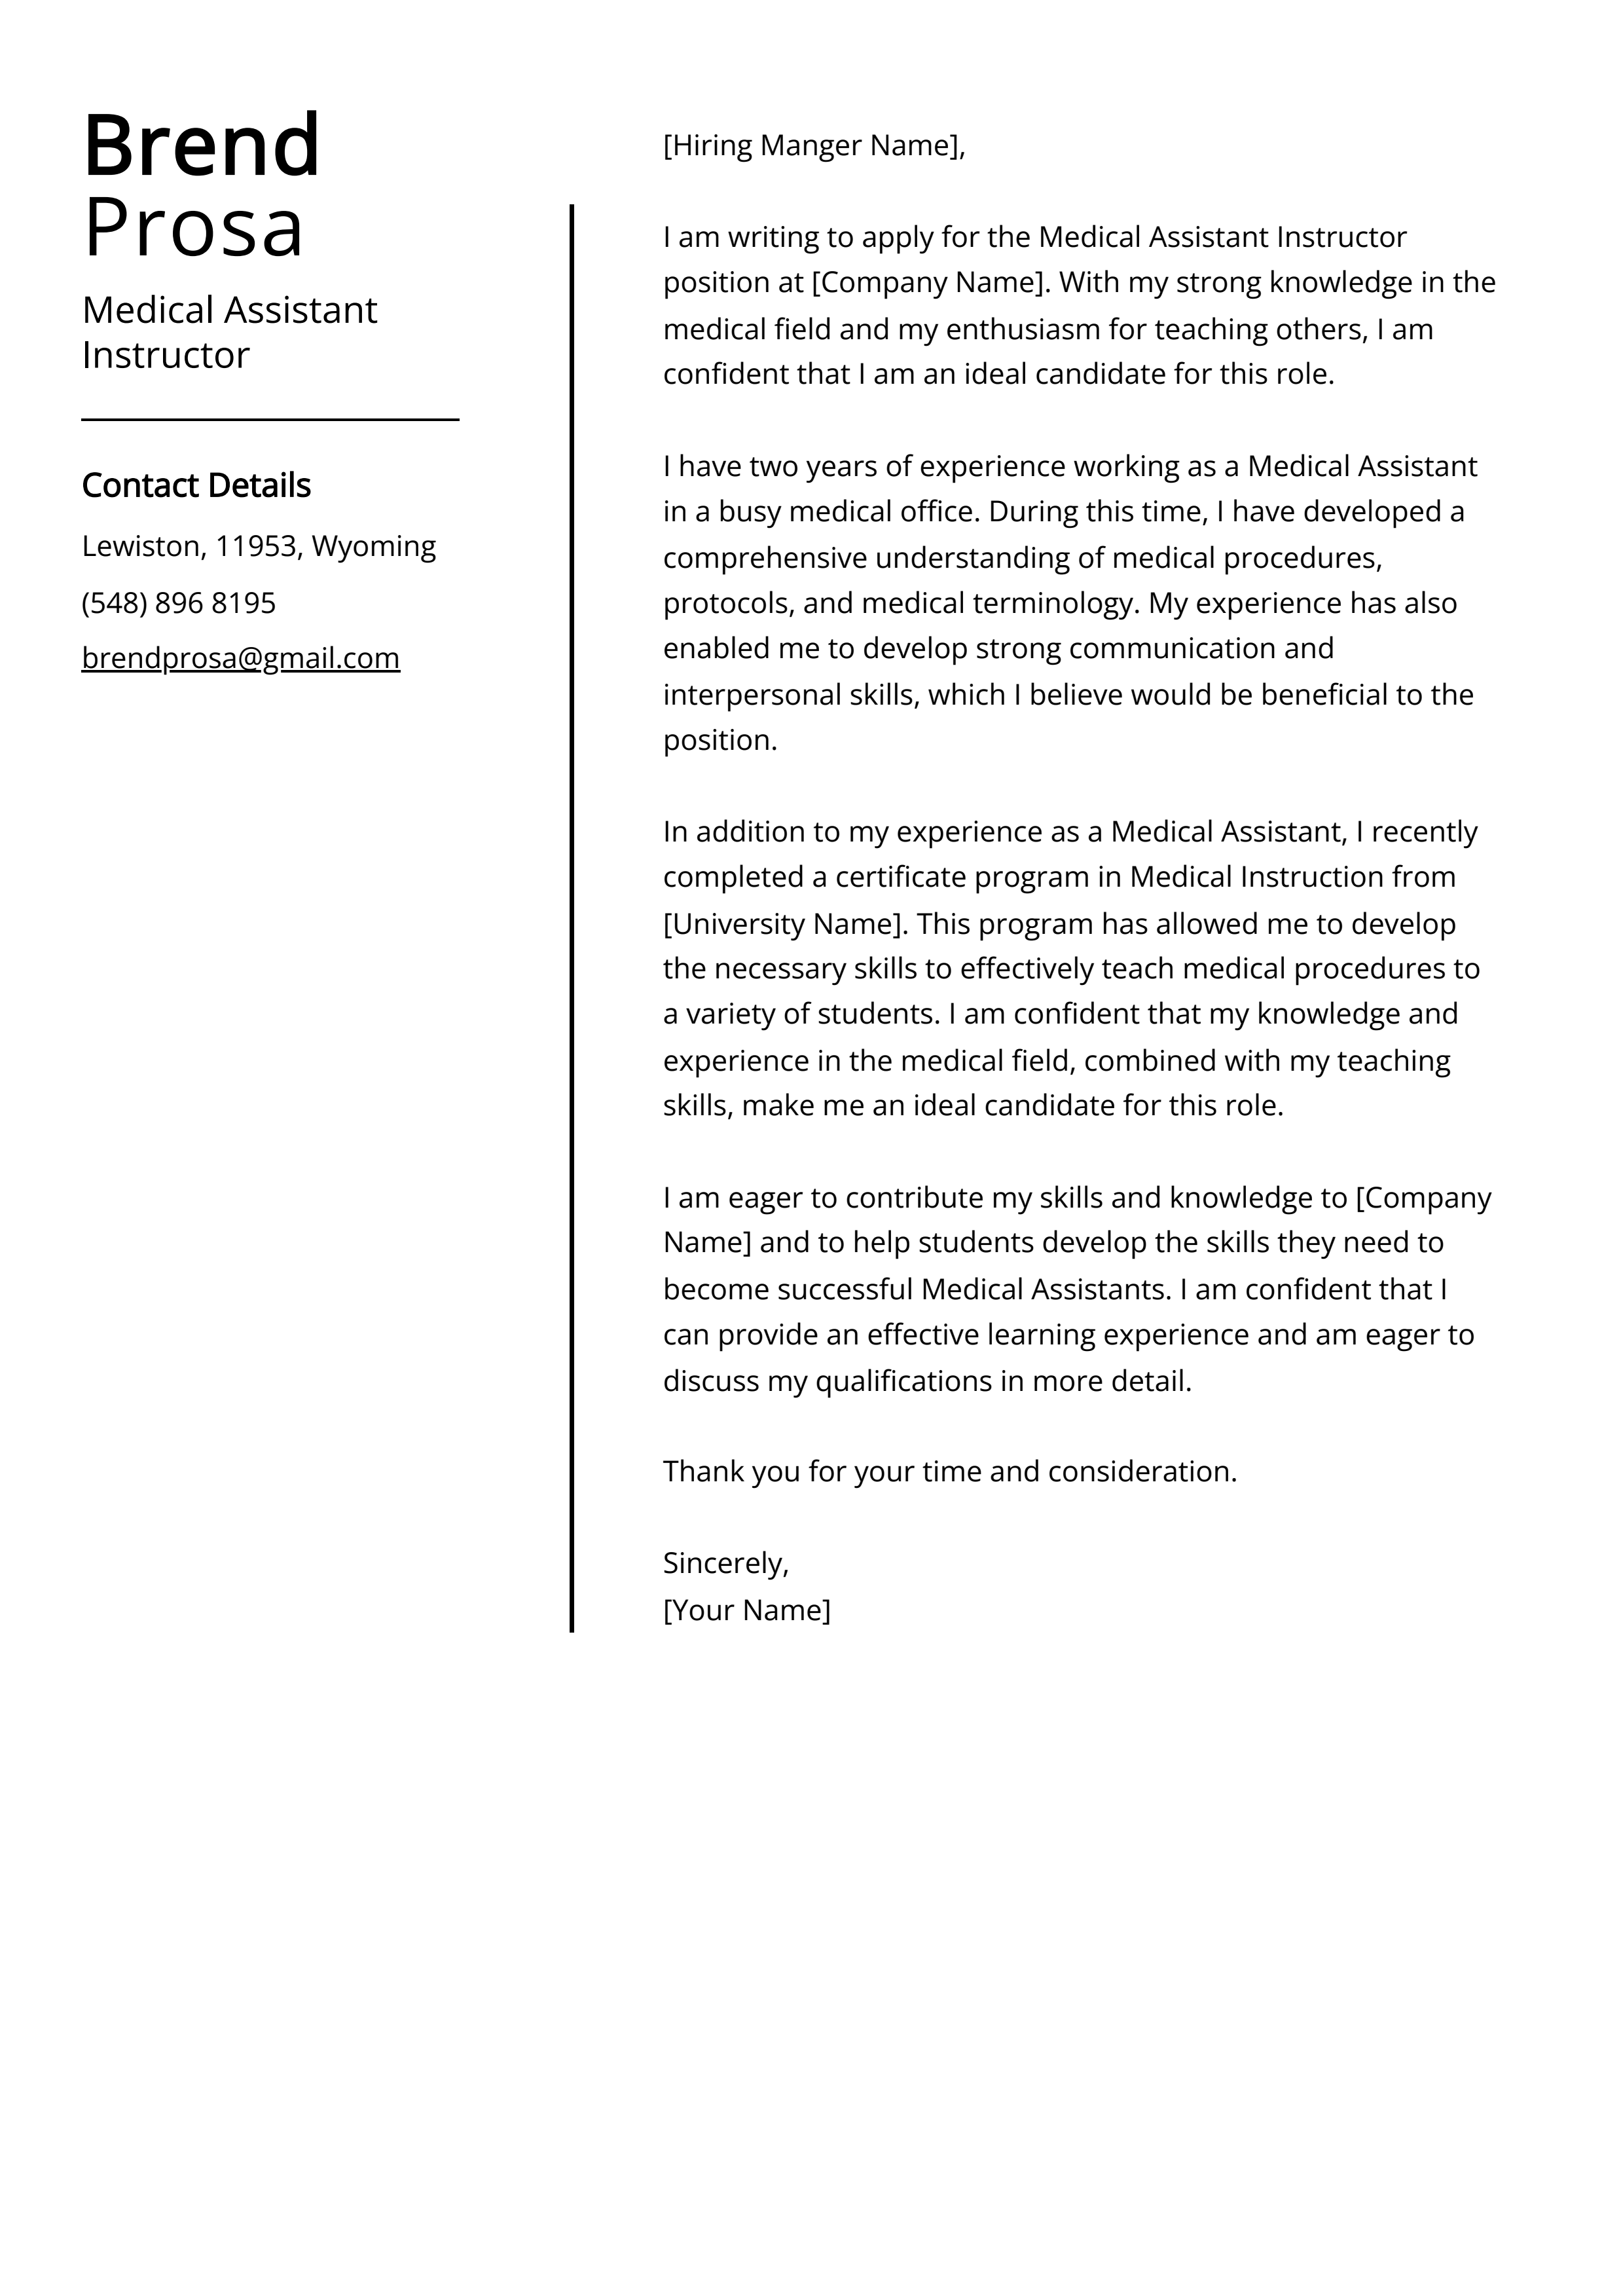 Medical Assistant Instructor Cover Letter Example